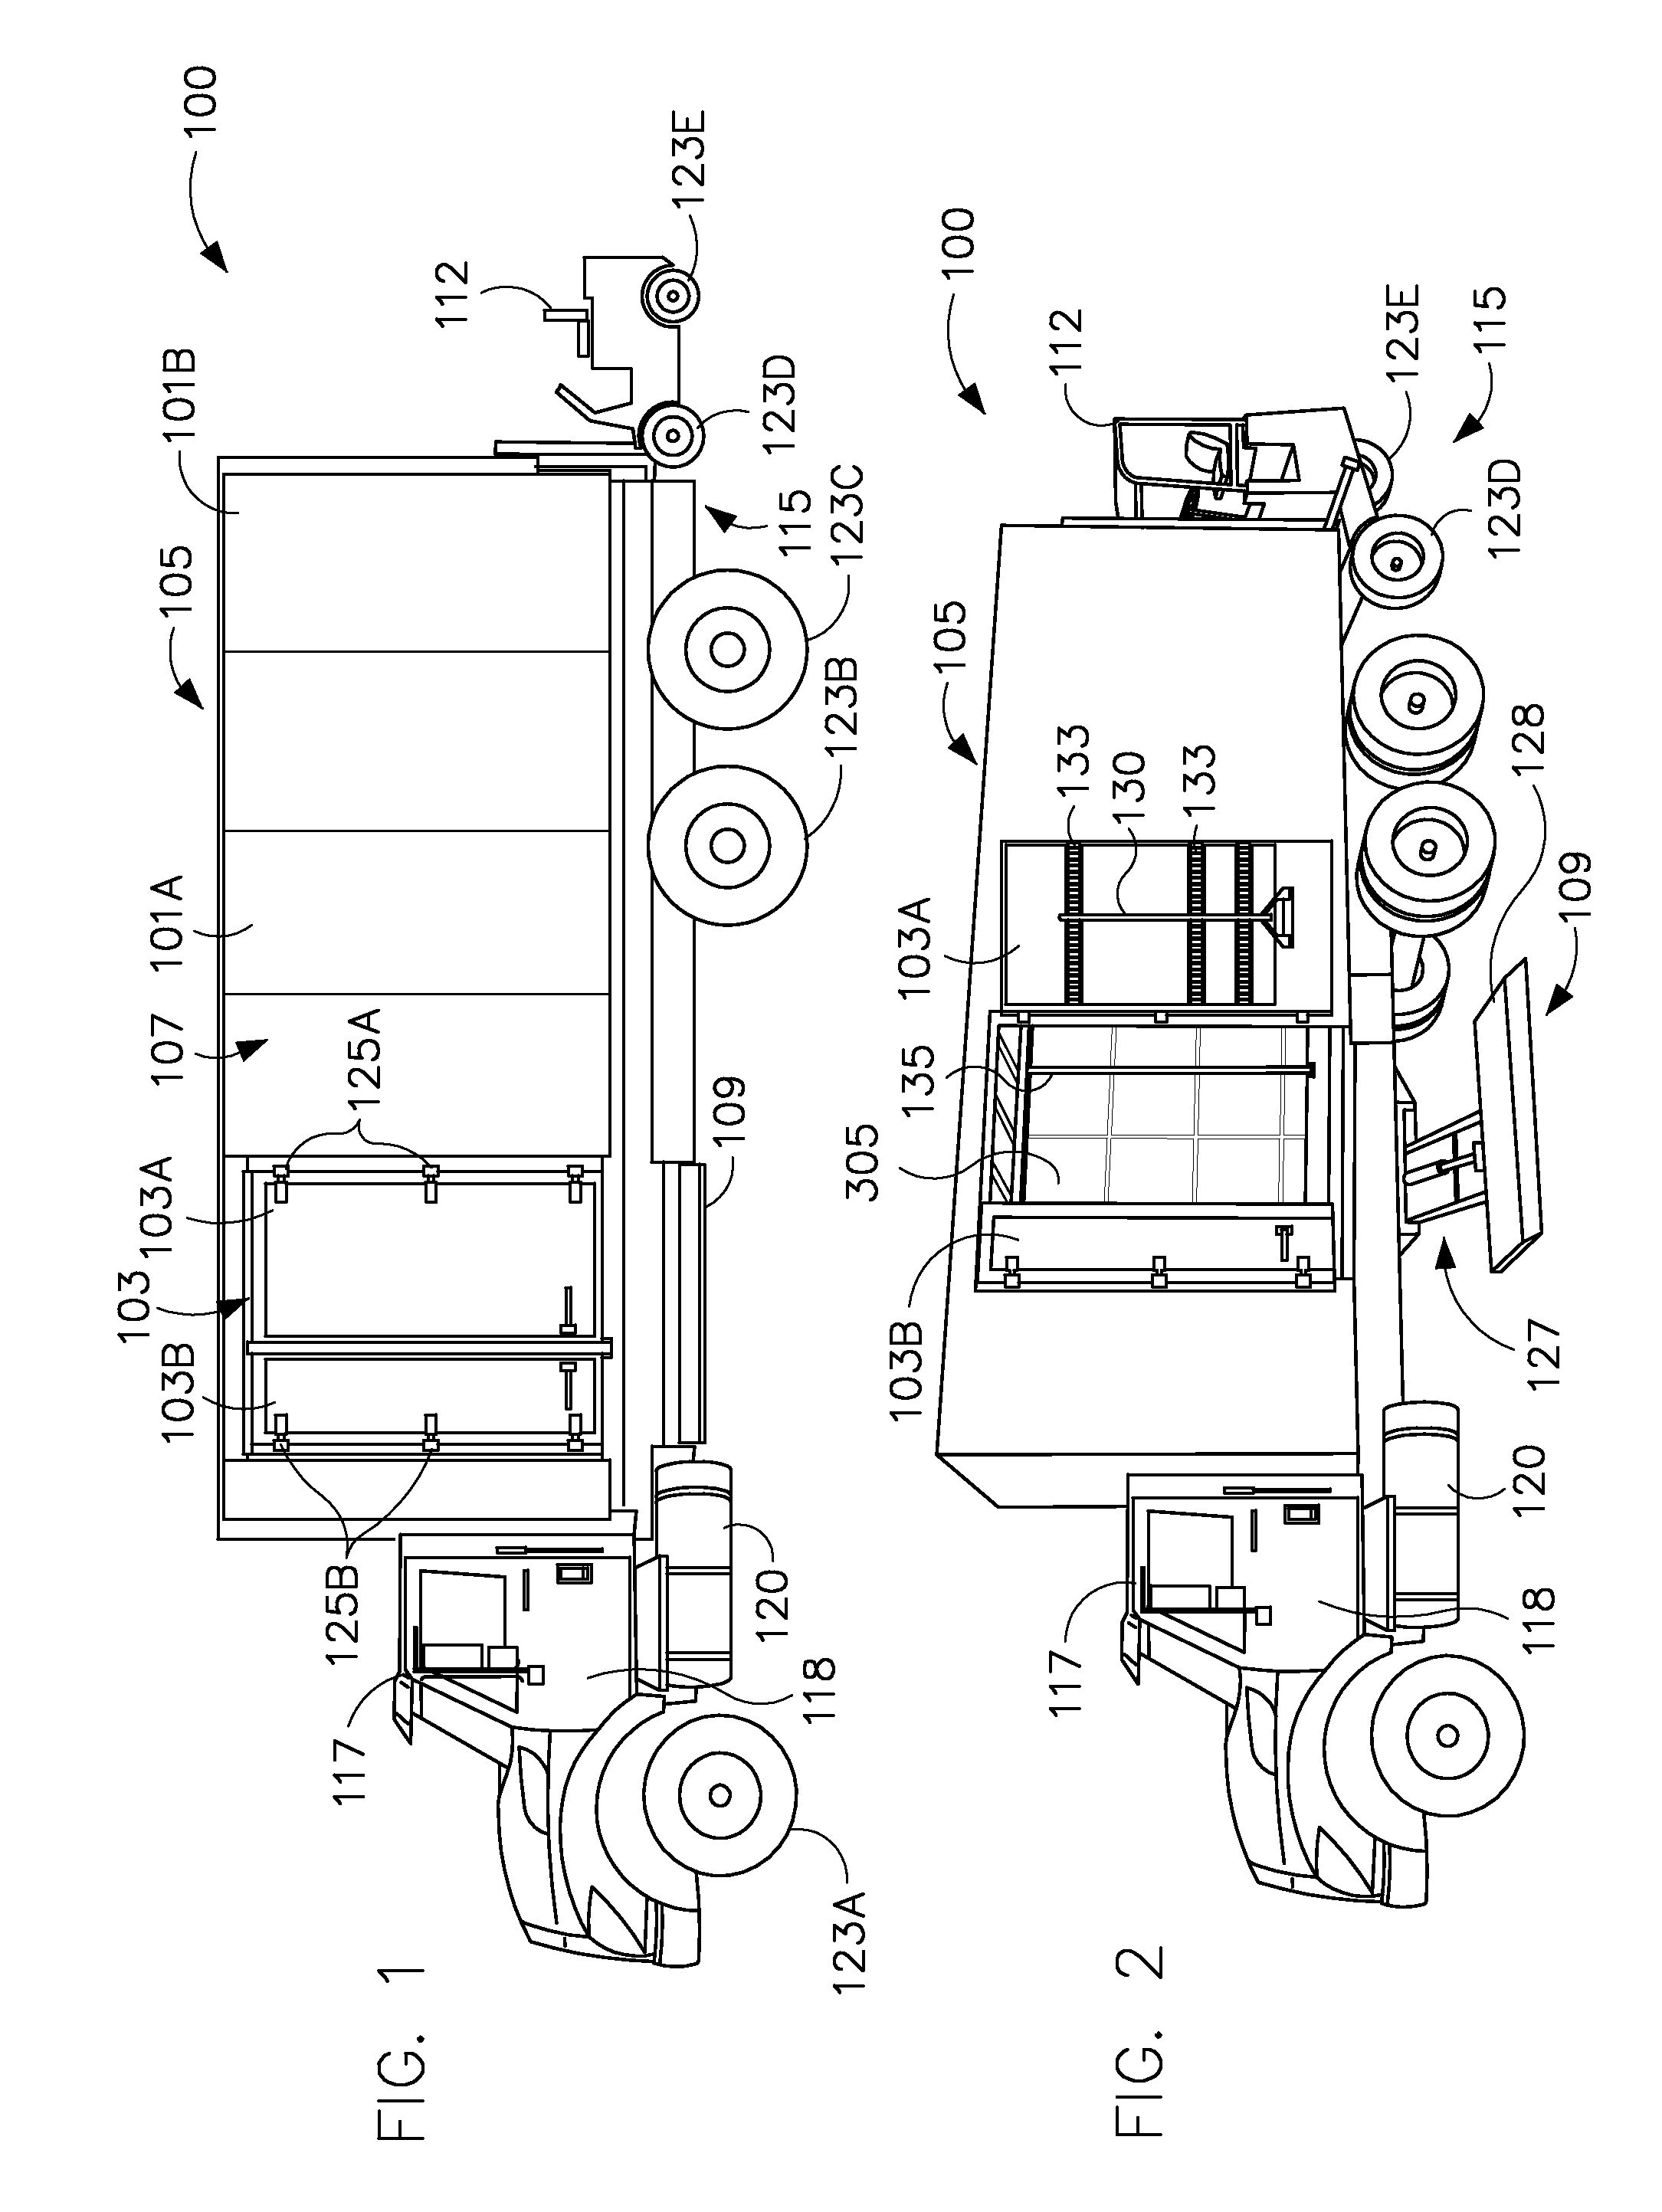 Method and system for transporting, loading, and unloading various types of goods